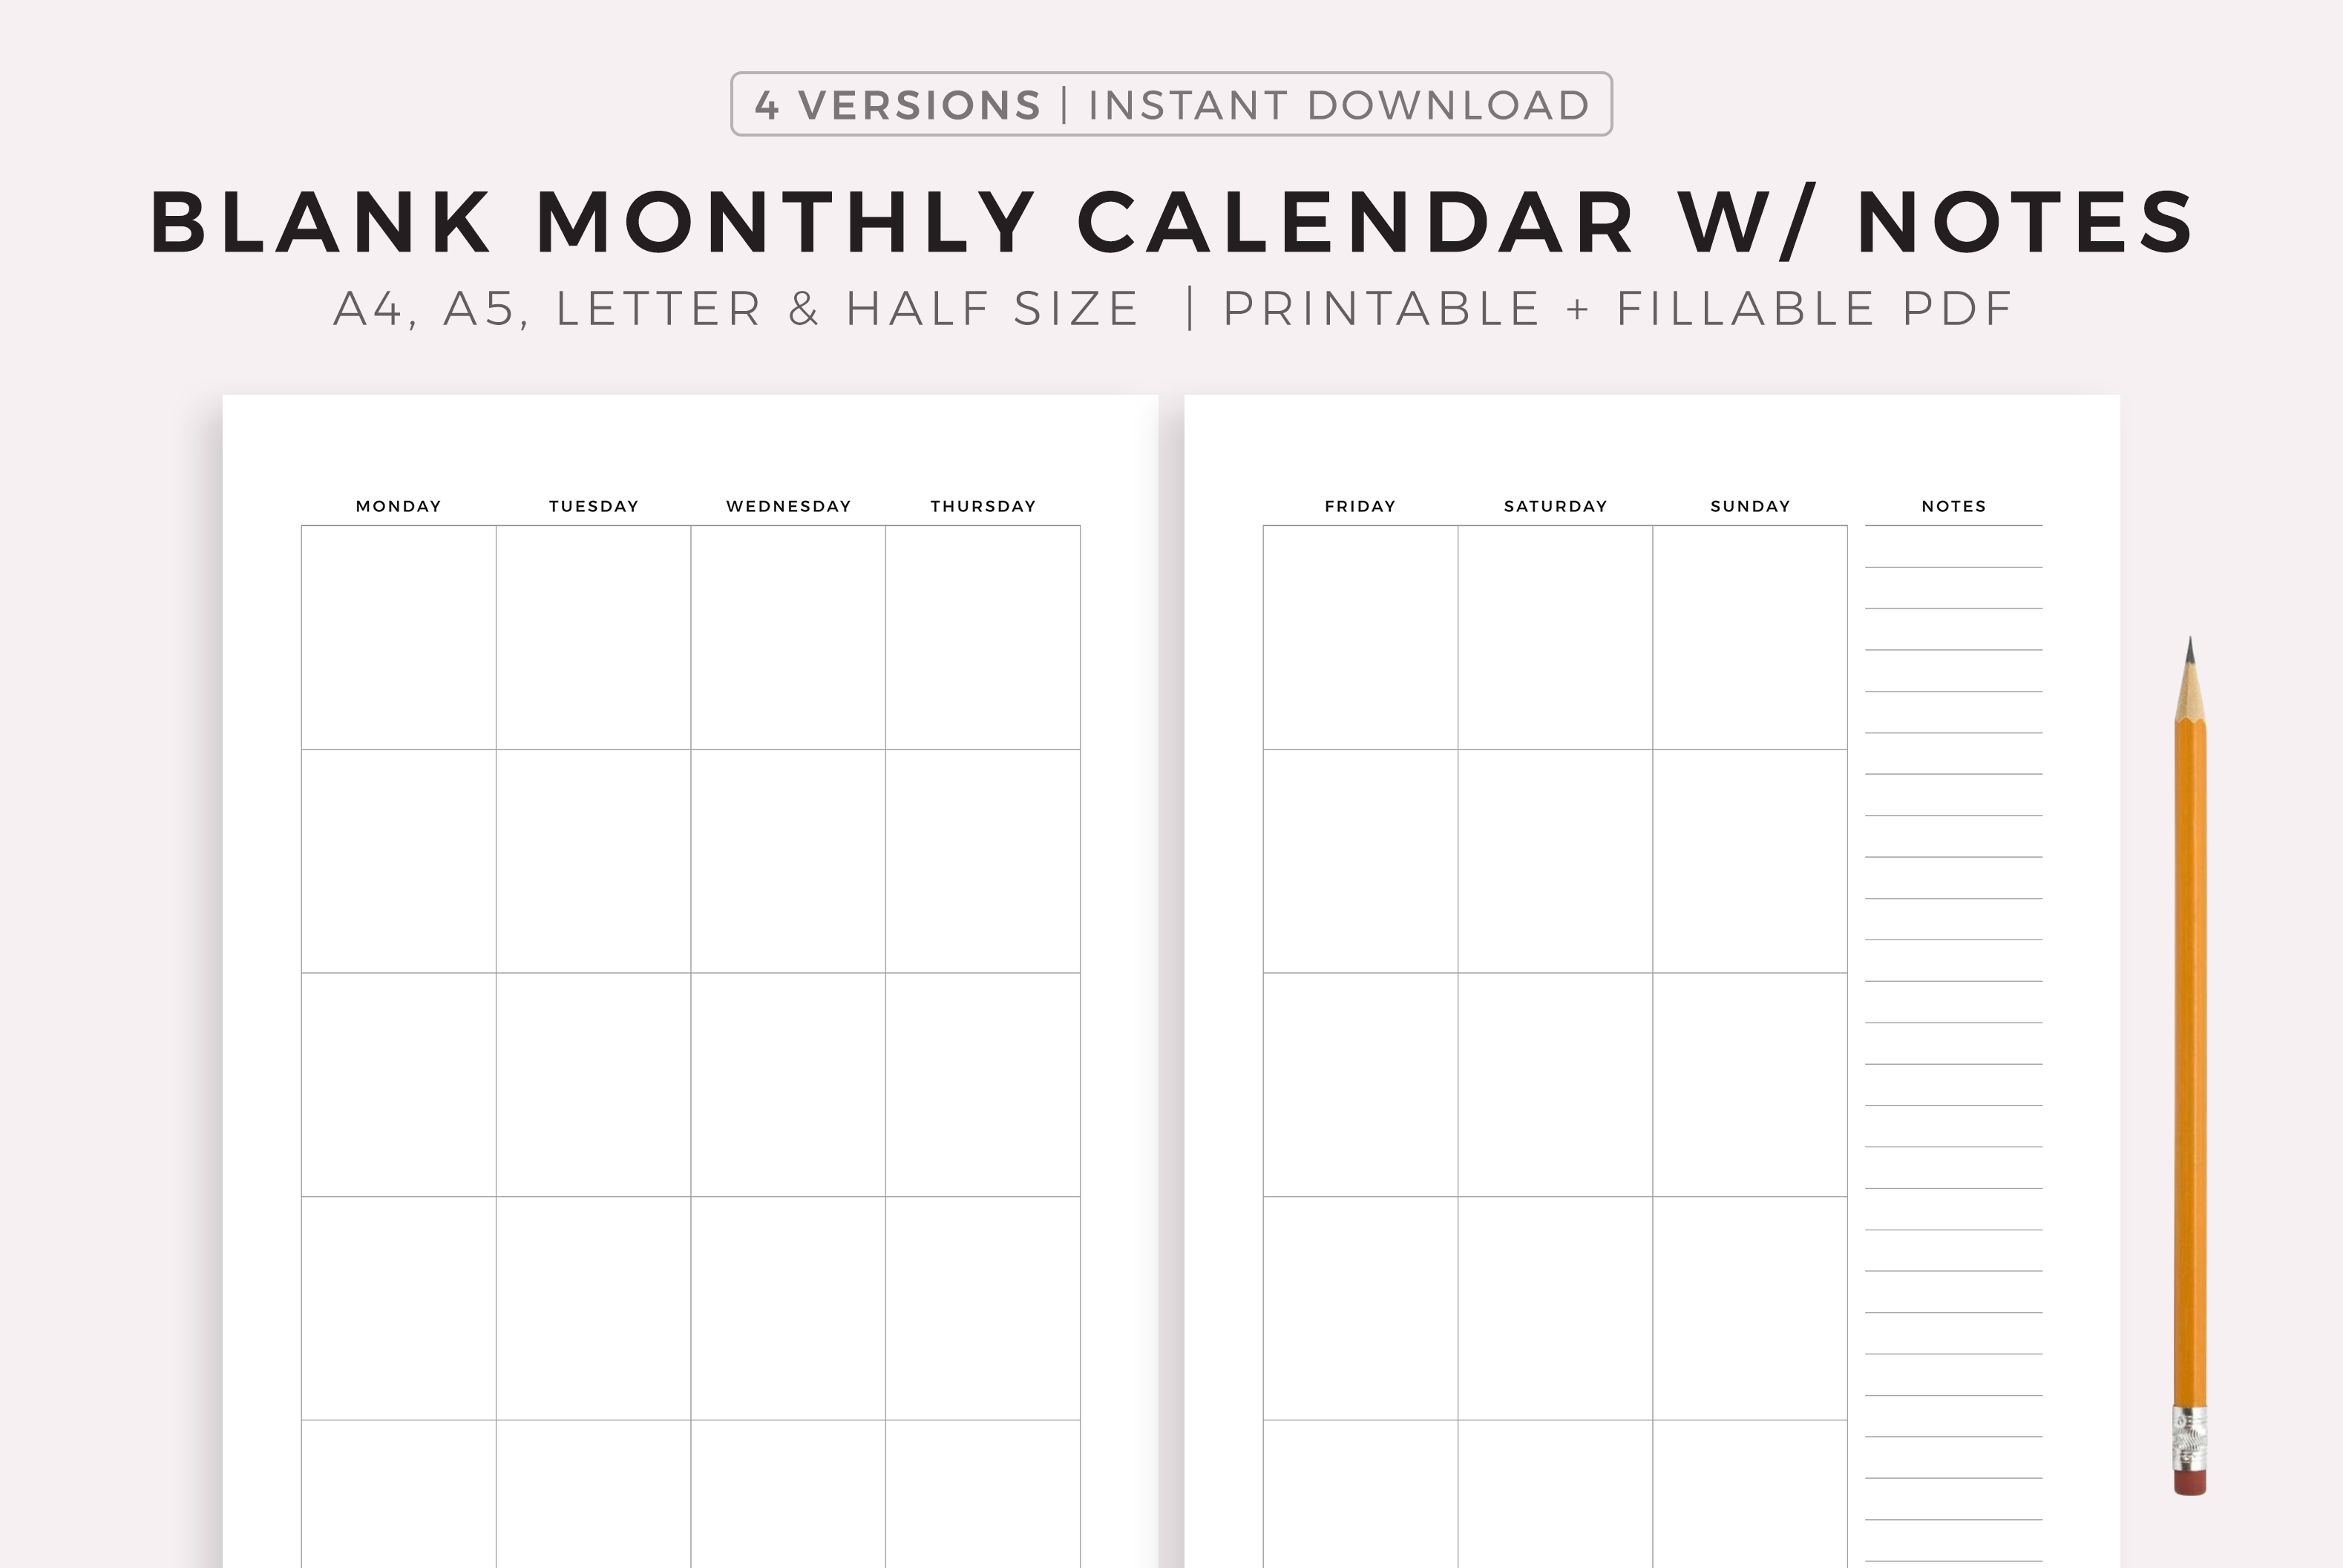 blank monthly calendar with notes 2 page printable calendar template by mylifeplans thehungryjpeg com